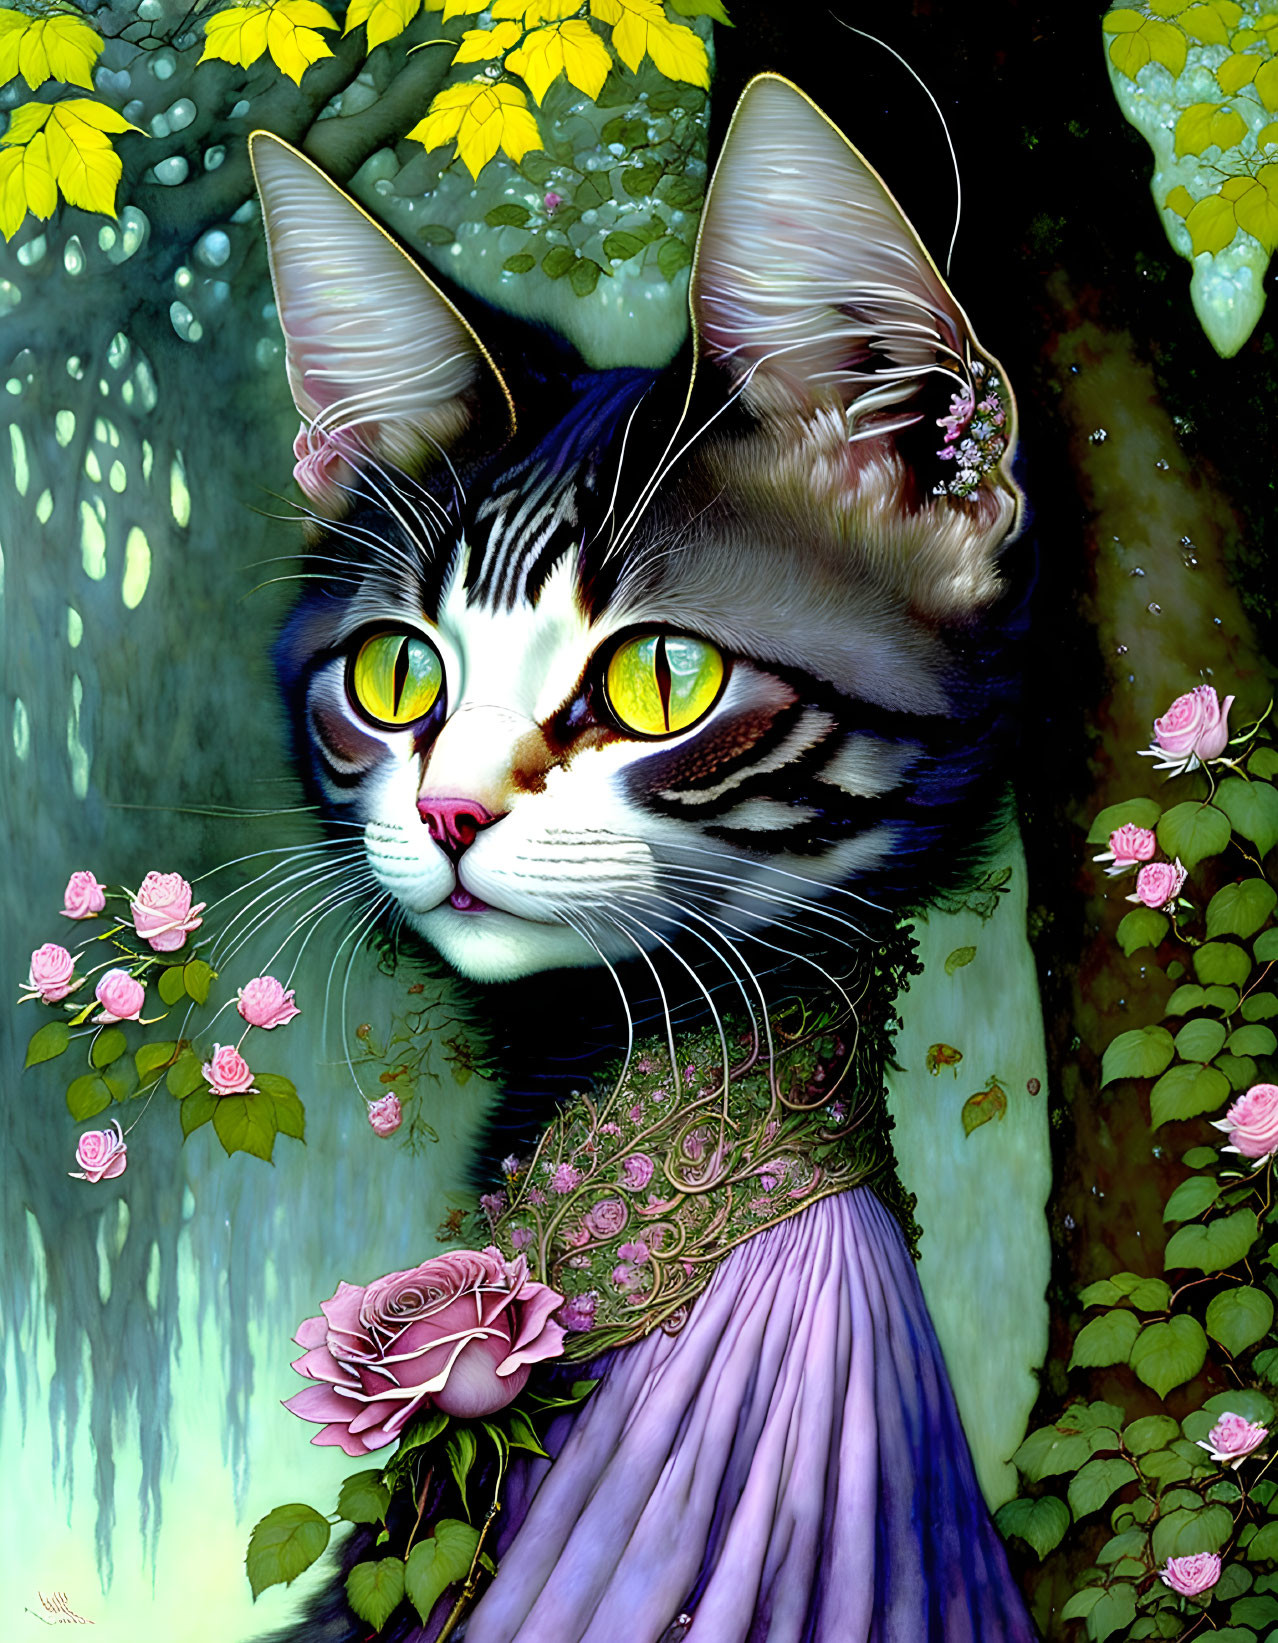 Anthropomorphic cat with green eyes in purple dress on floral background